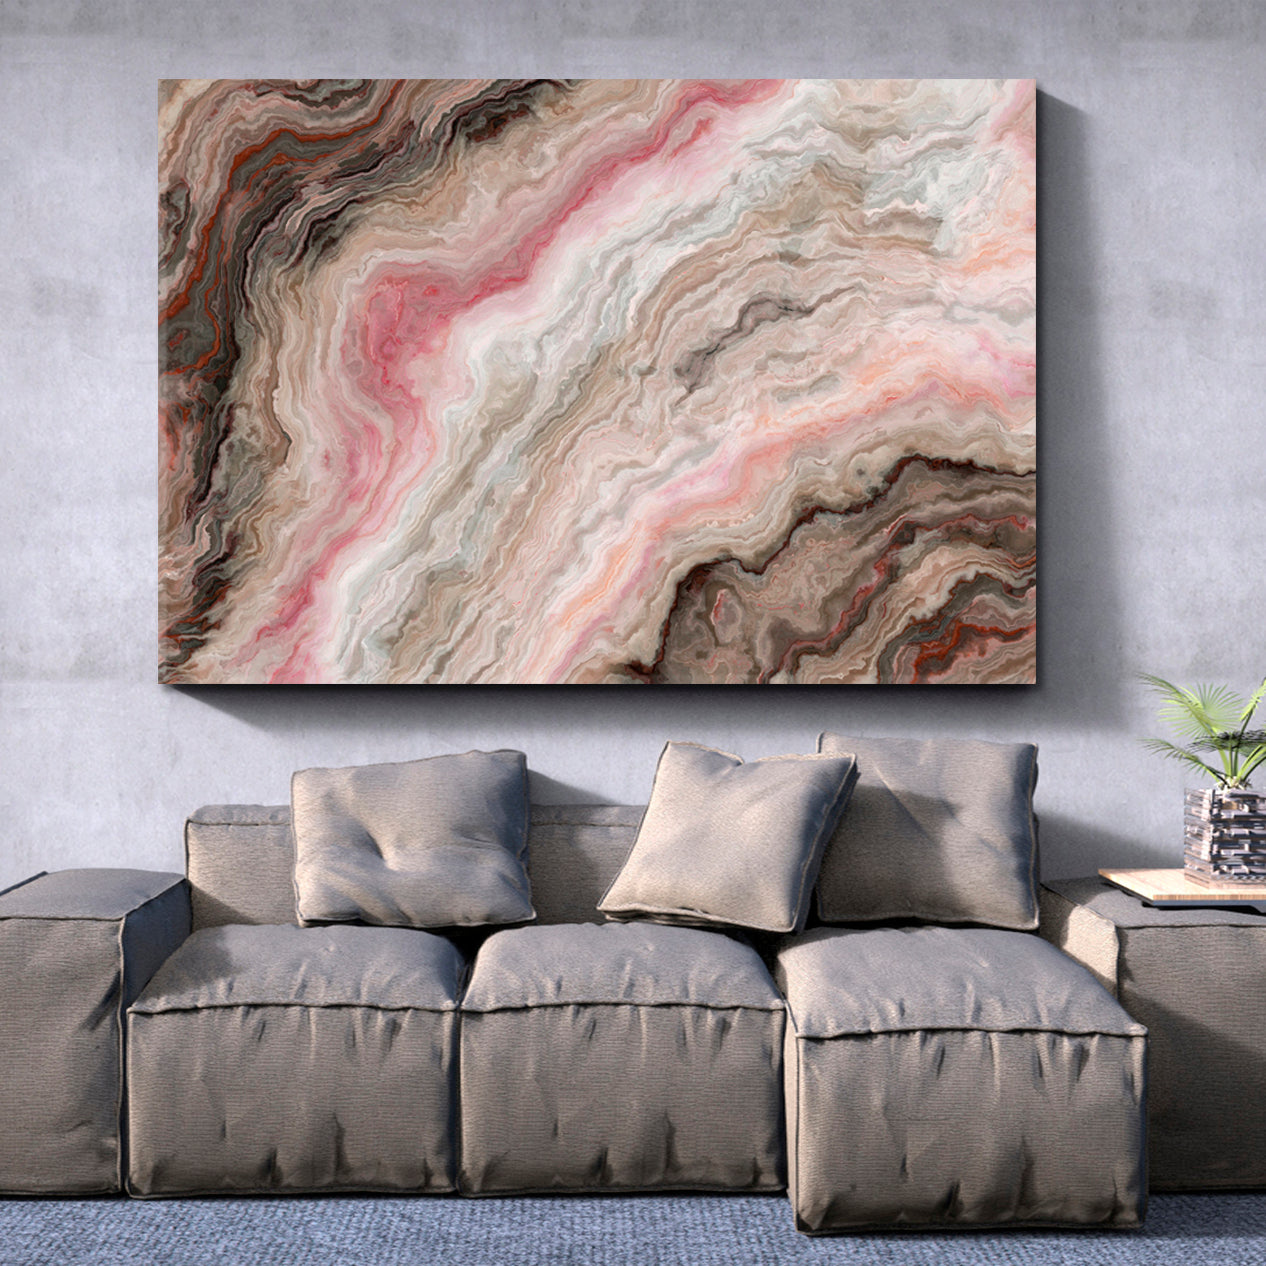 MARBLE Abstract Onyx Rose Inclusions Wavy Pattern Natural Beauty Fluid Art, Oriental Marbling Canvas Print Artesty 1 panel 24" x 16" 